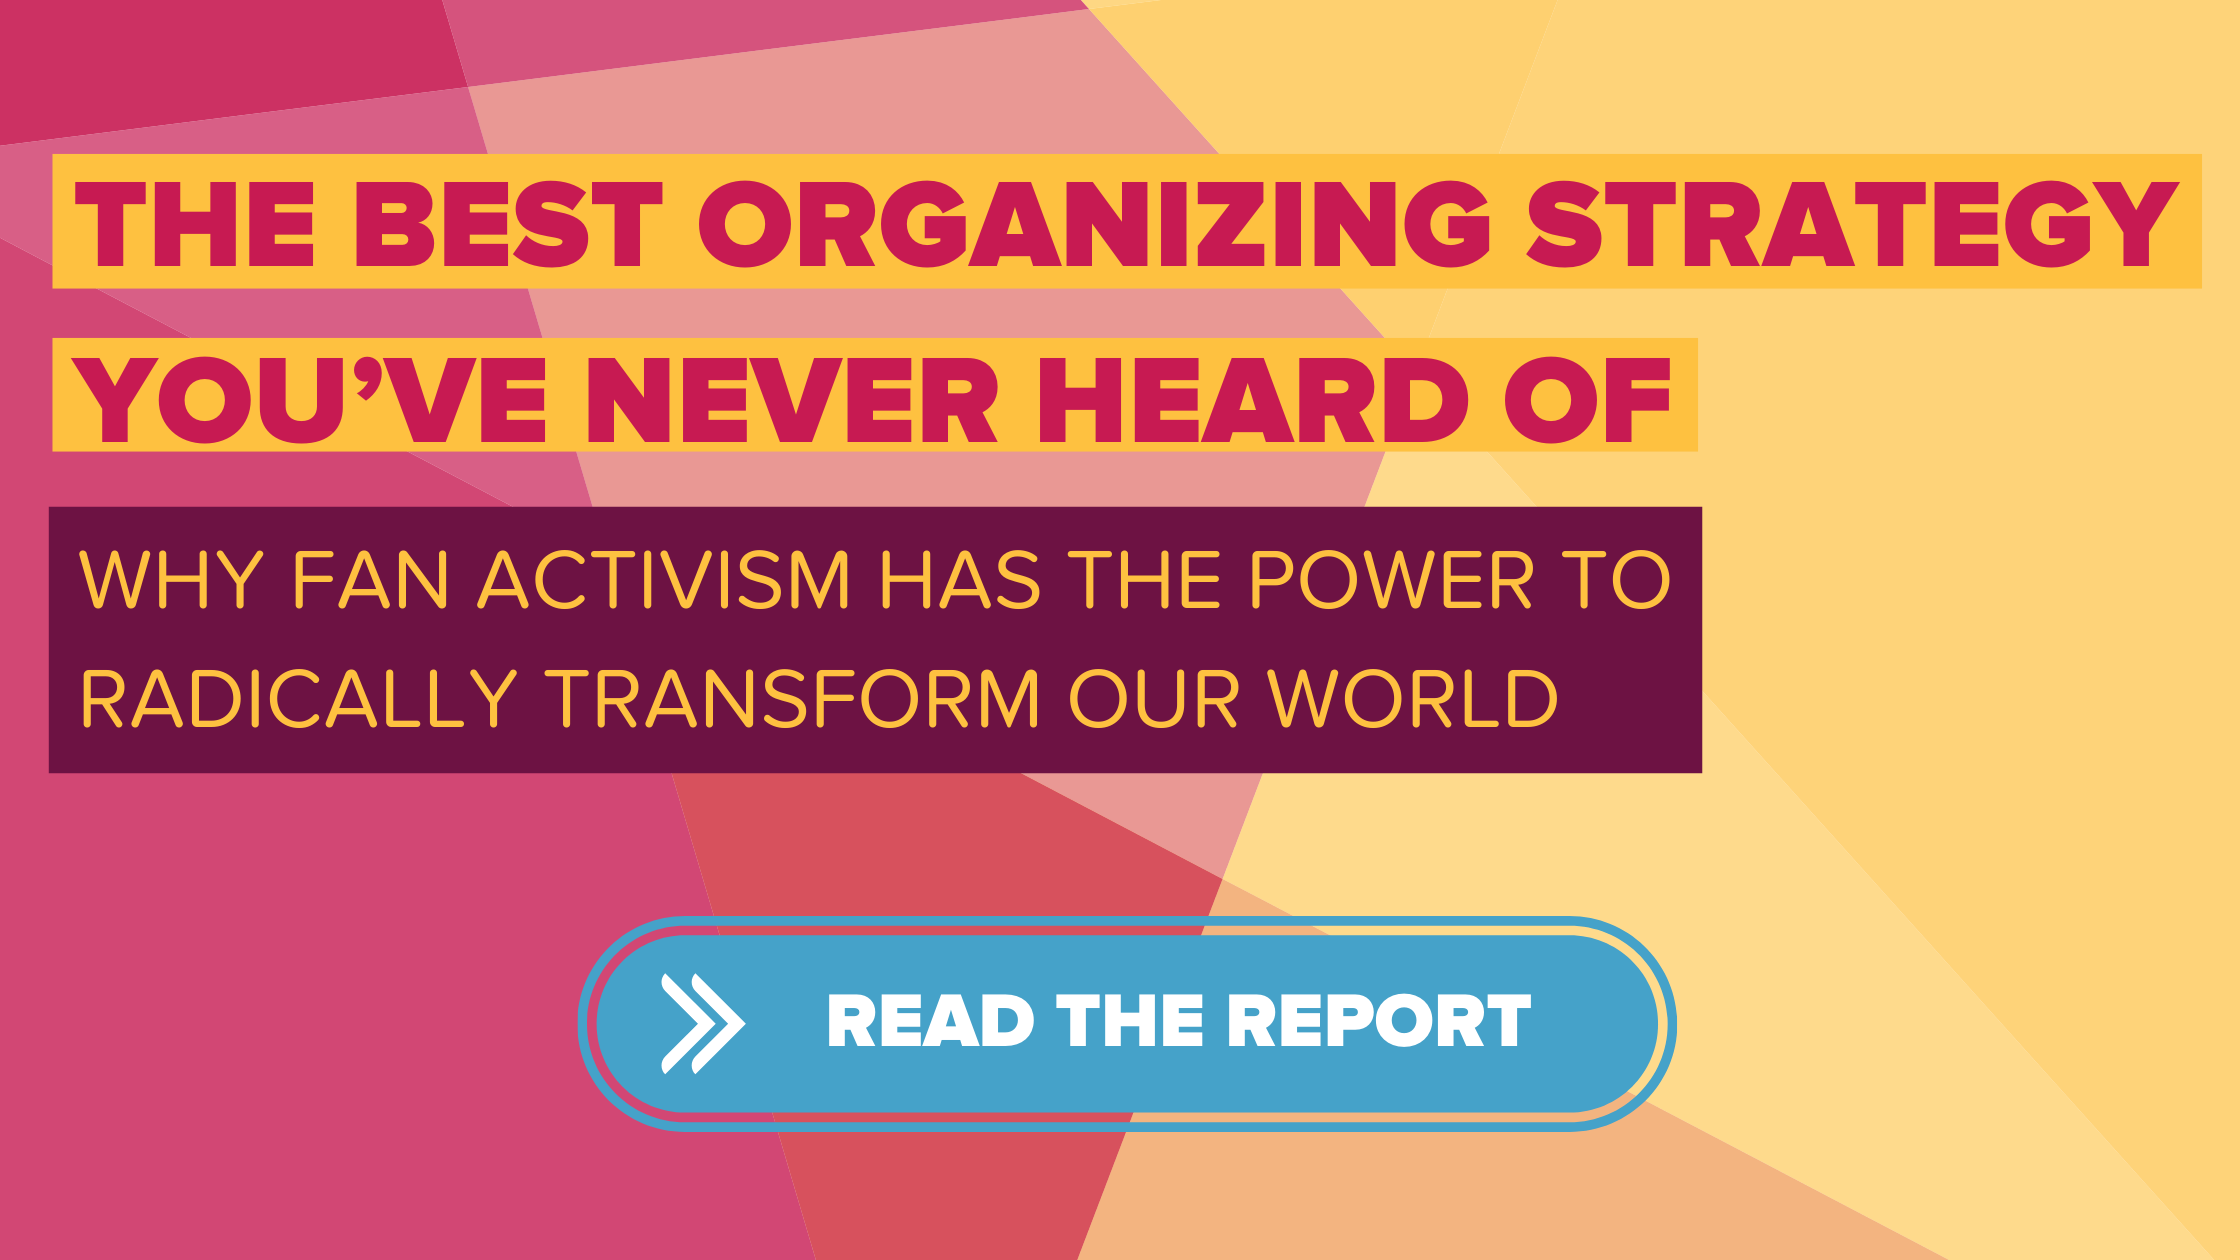 A pattern of geometric shapes in pink, yellow and orange. Text on top of the shapes reads "The Best Organizing Strategy You've Never Heard Of: Why Fan Activism Has the Power to Radically Transform Our World"